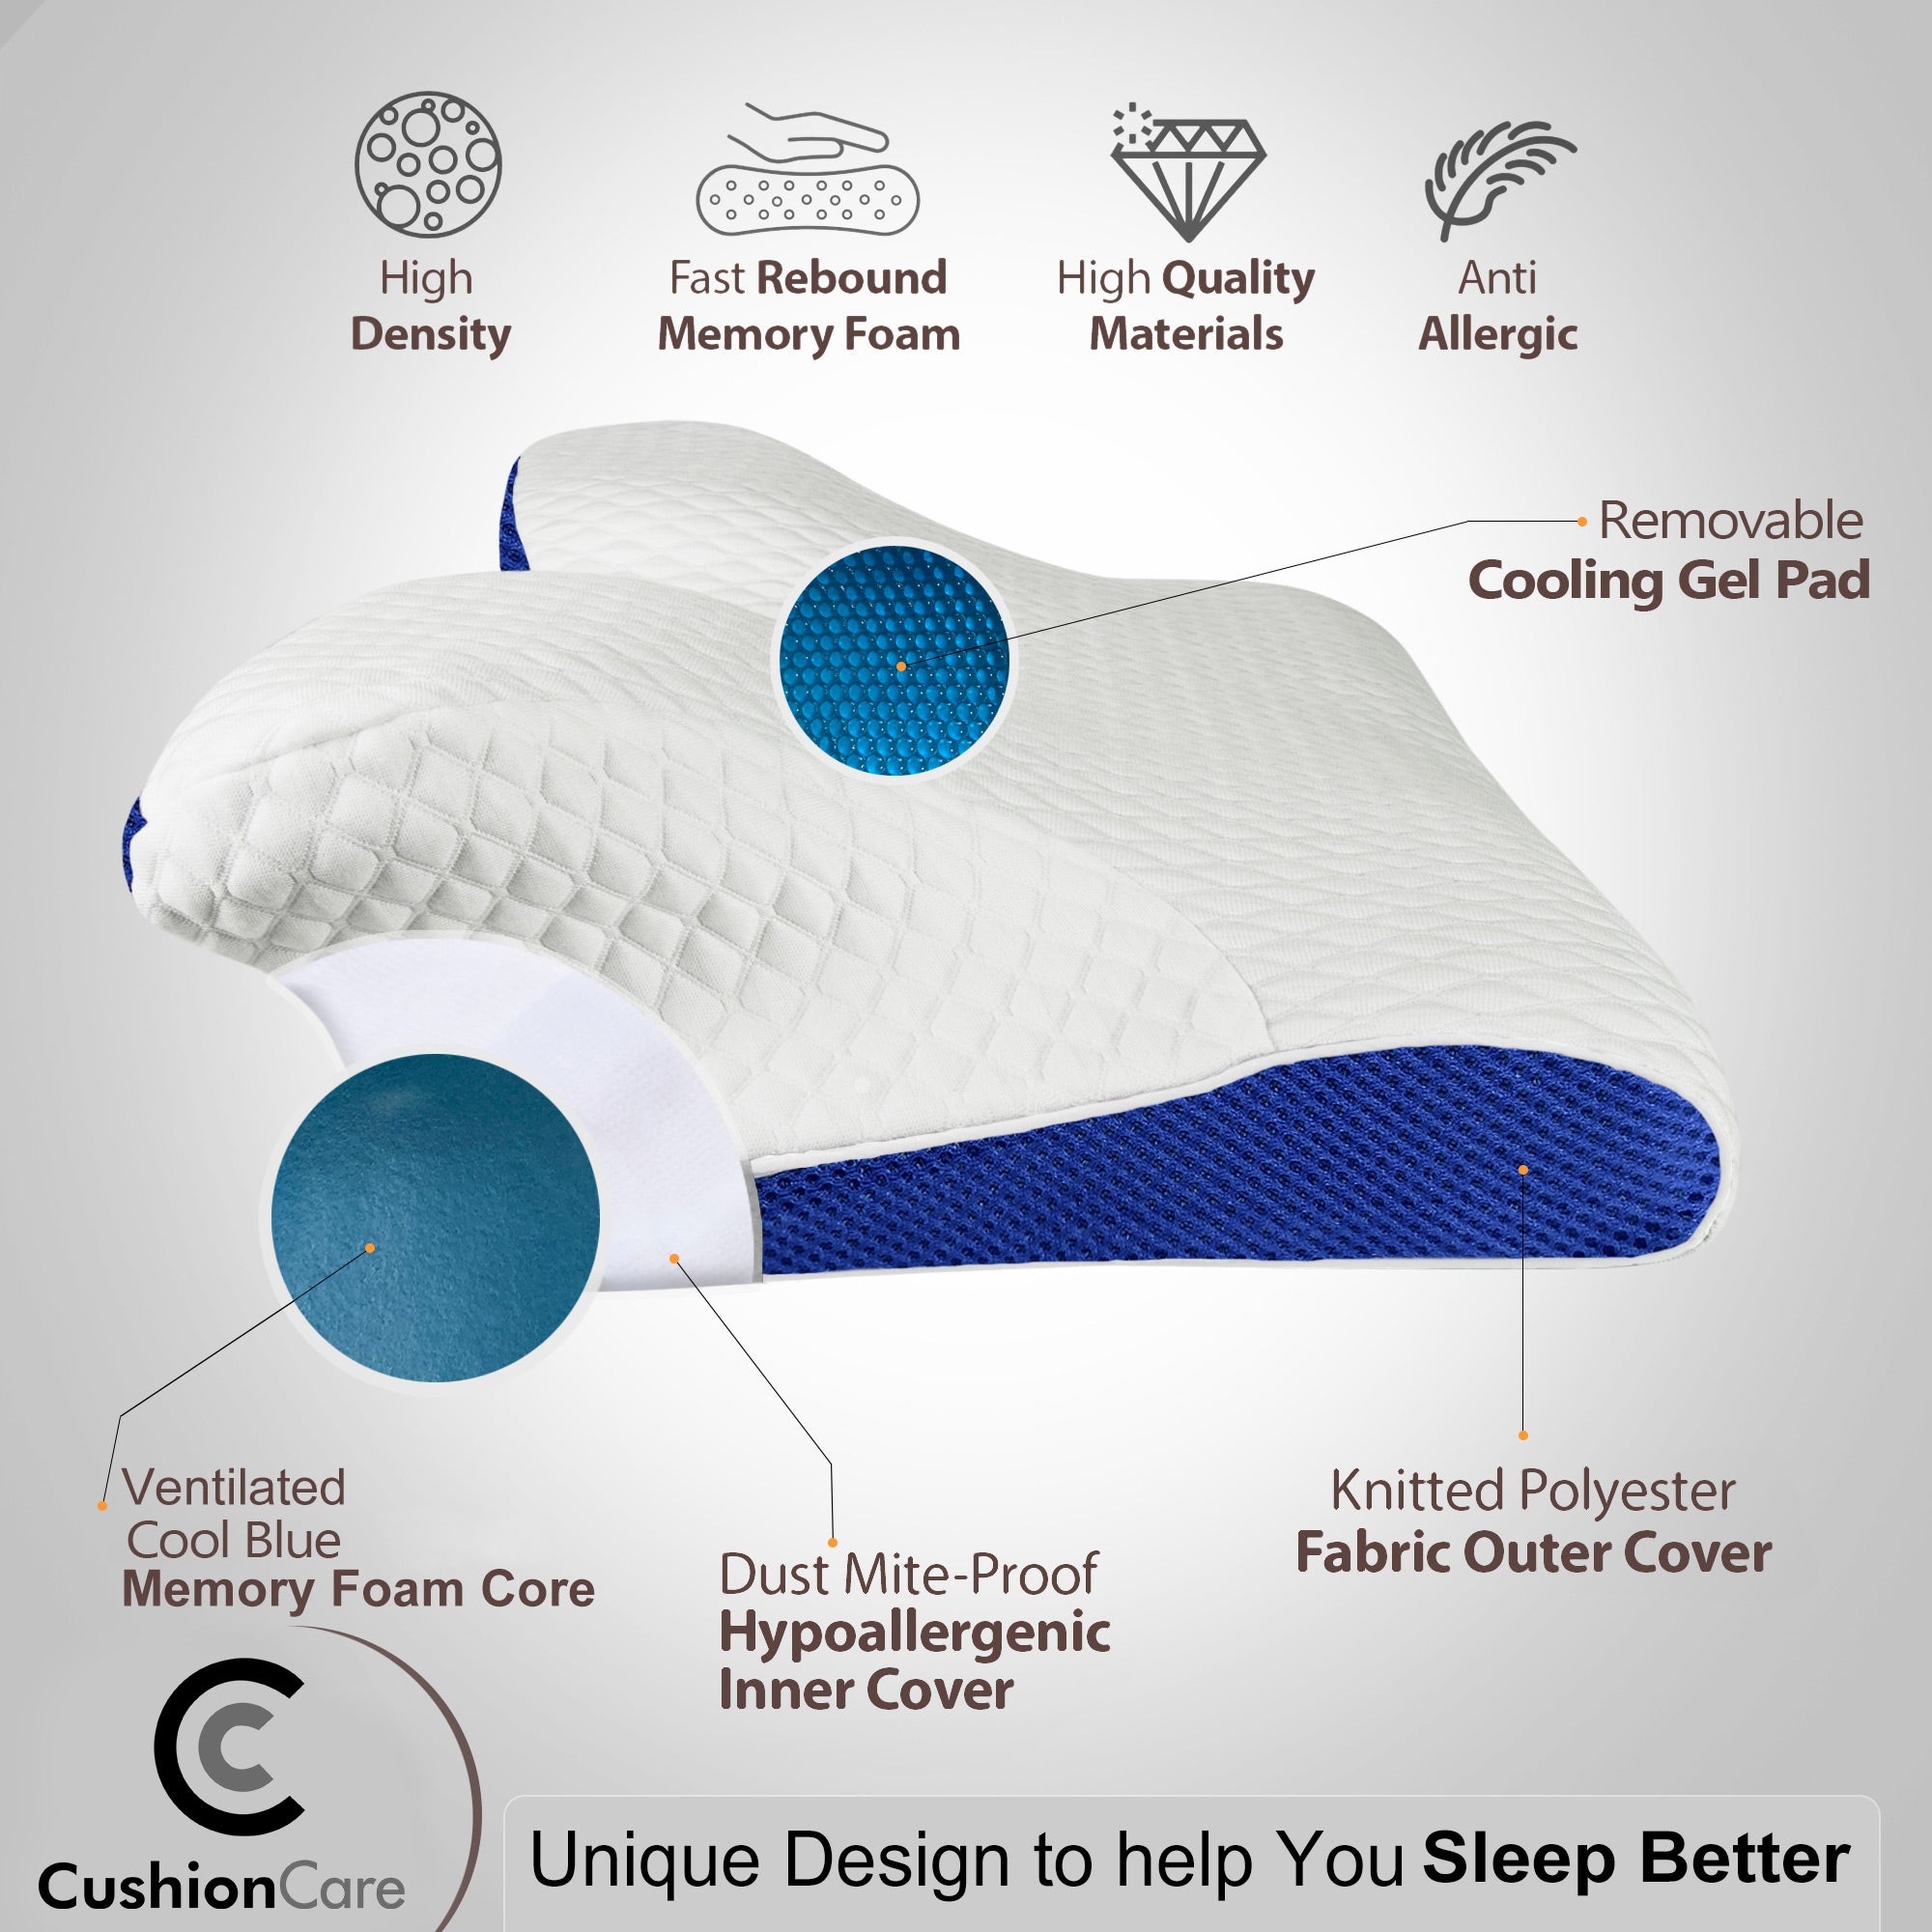 Curved Side Sleeper Pillow for Pain Relief Sleeping – CushionCare